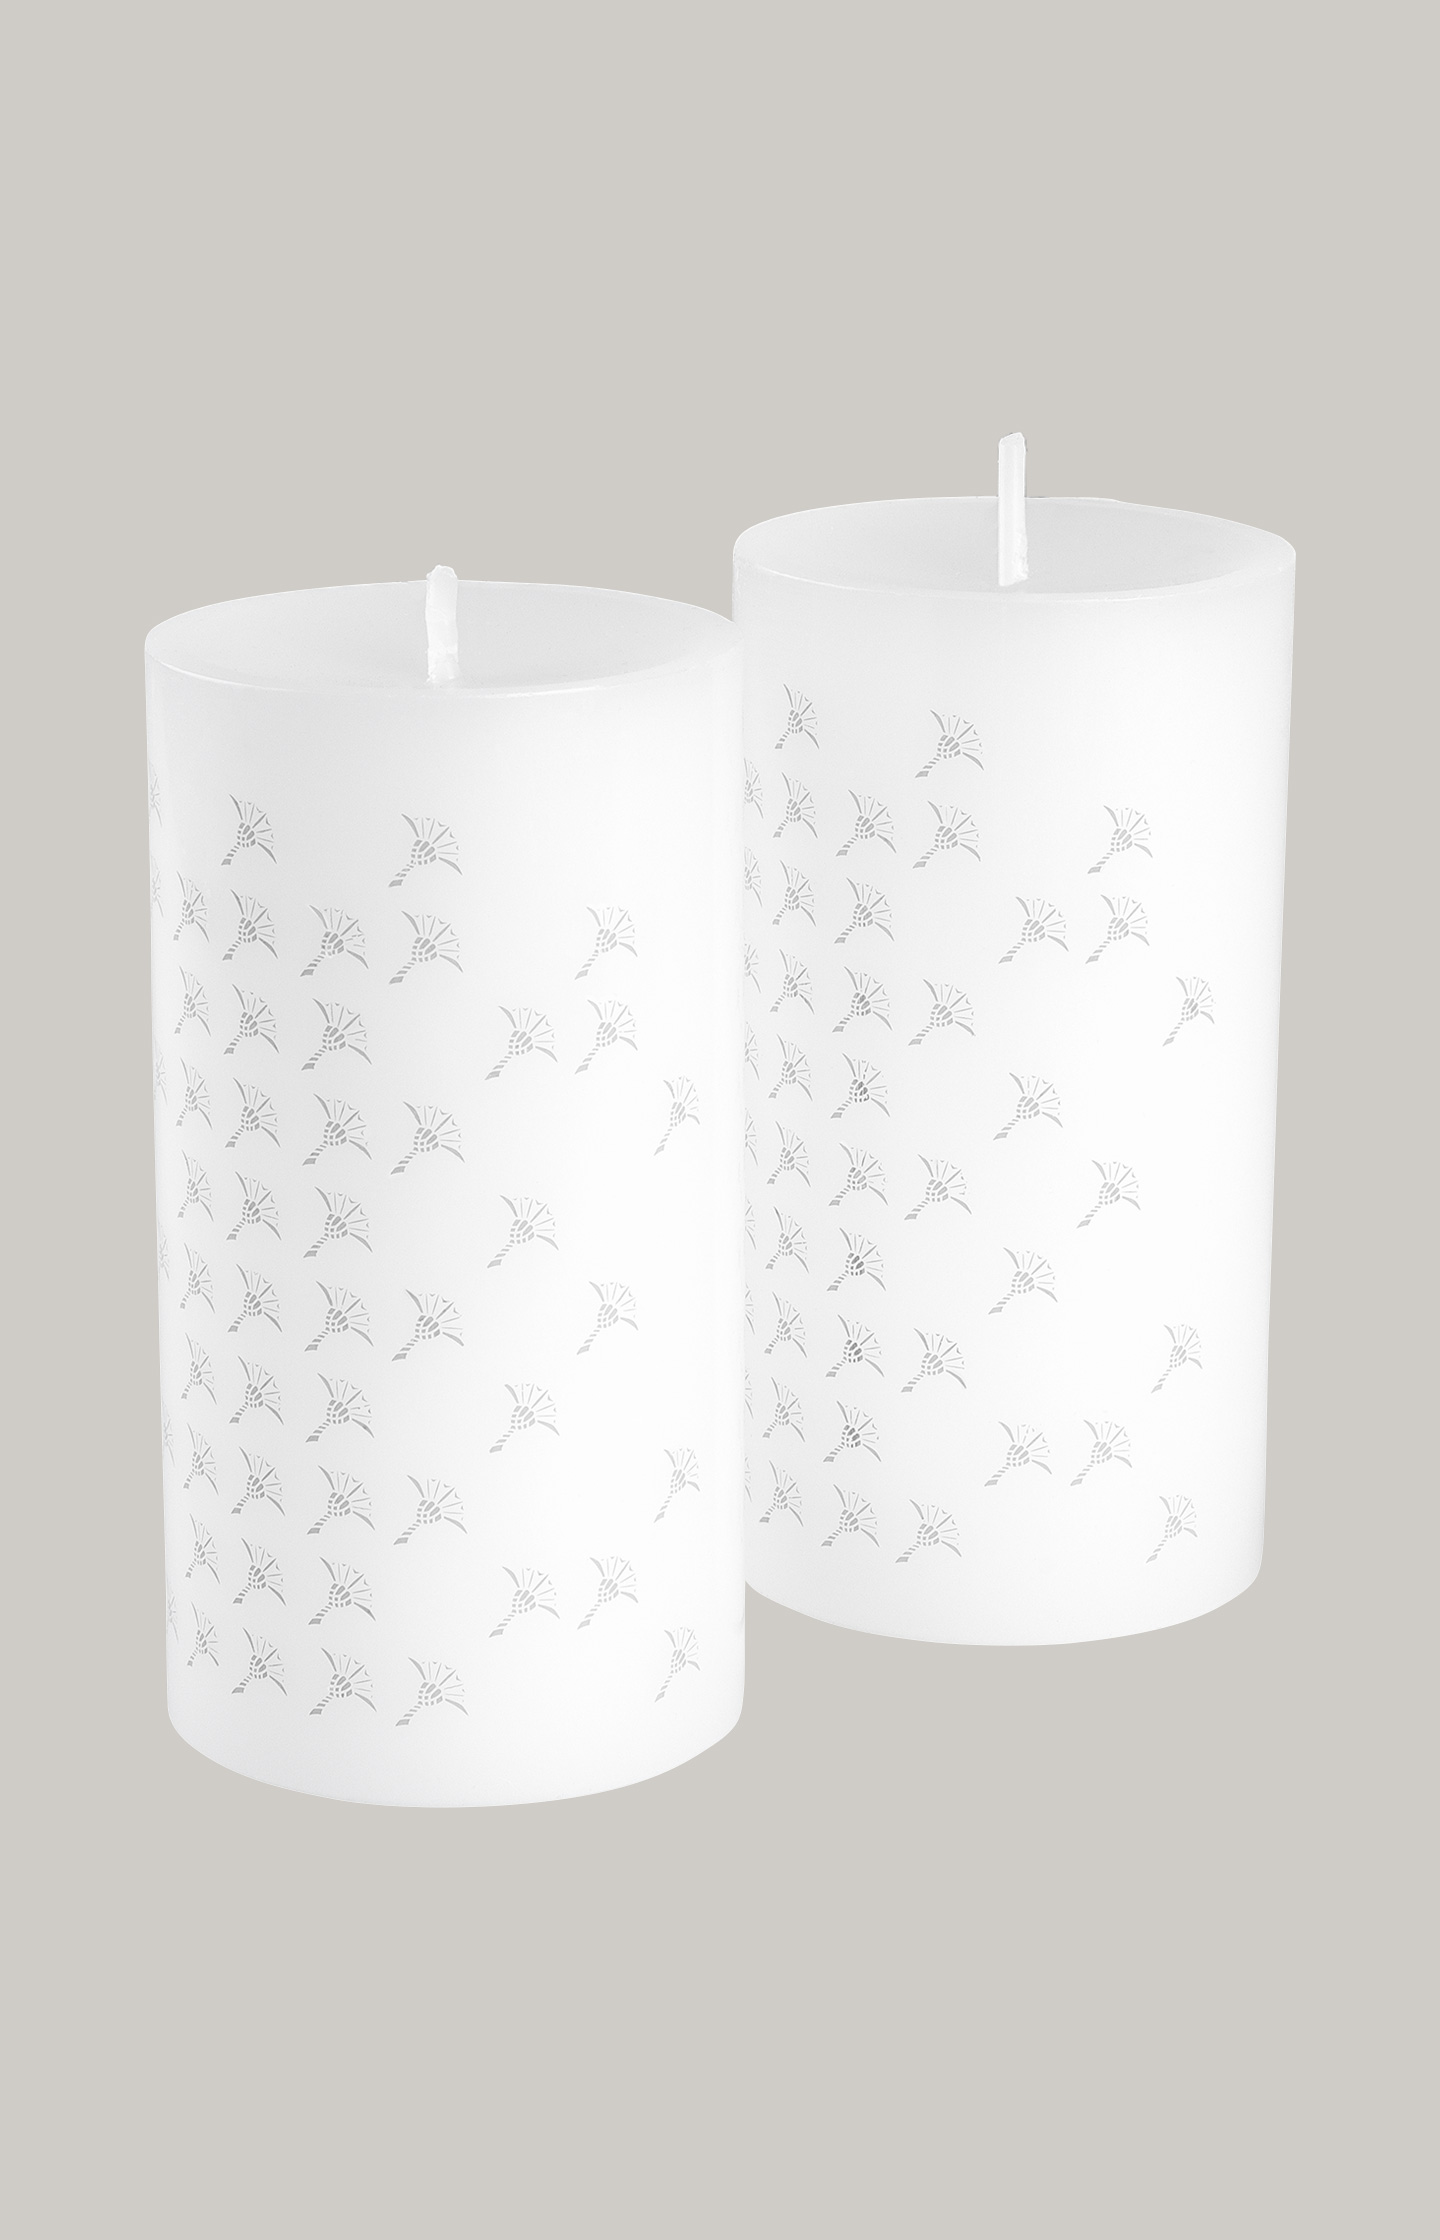 New JOOP! FADED CORNFLOWER pillar tall of - candle Online JOOP! 15 in cm 2, Shop white - in set the